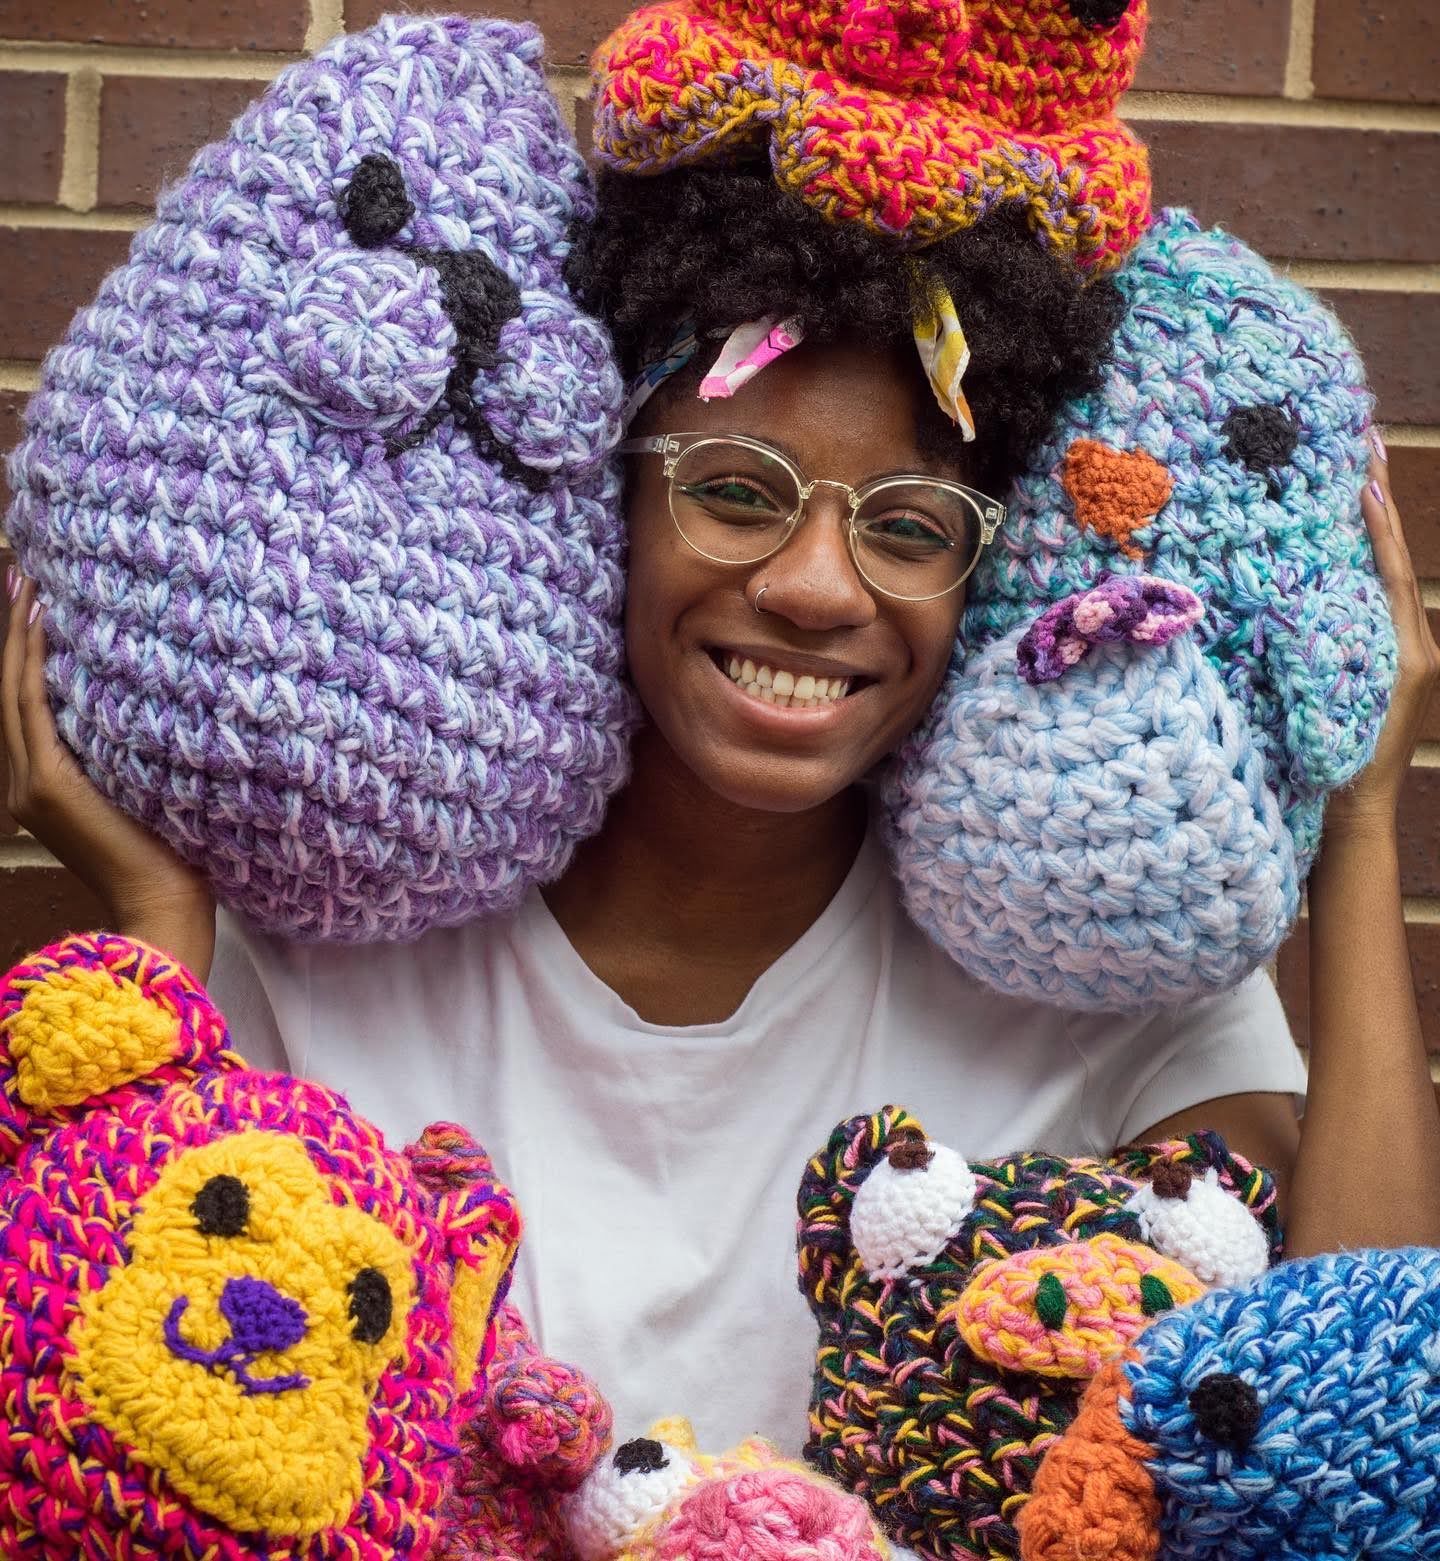 Black woman wearing a whilte shirt surrounded by colorful crochet stuffed animals.